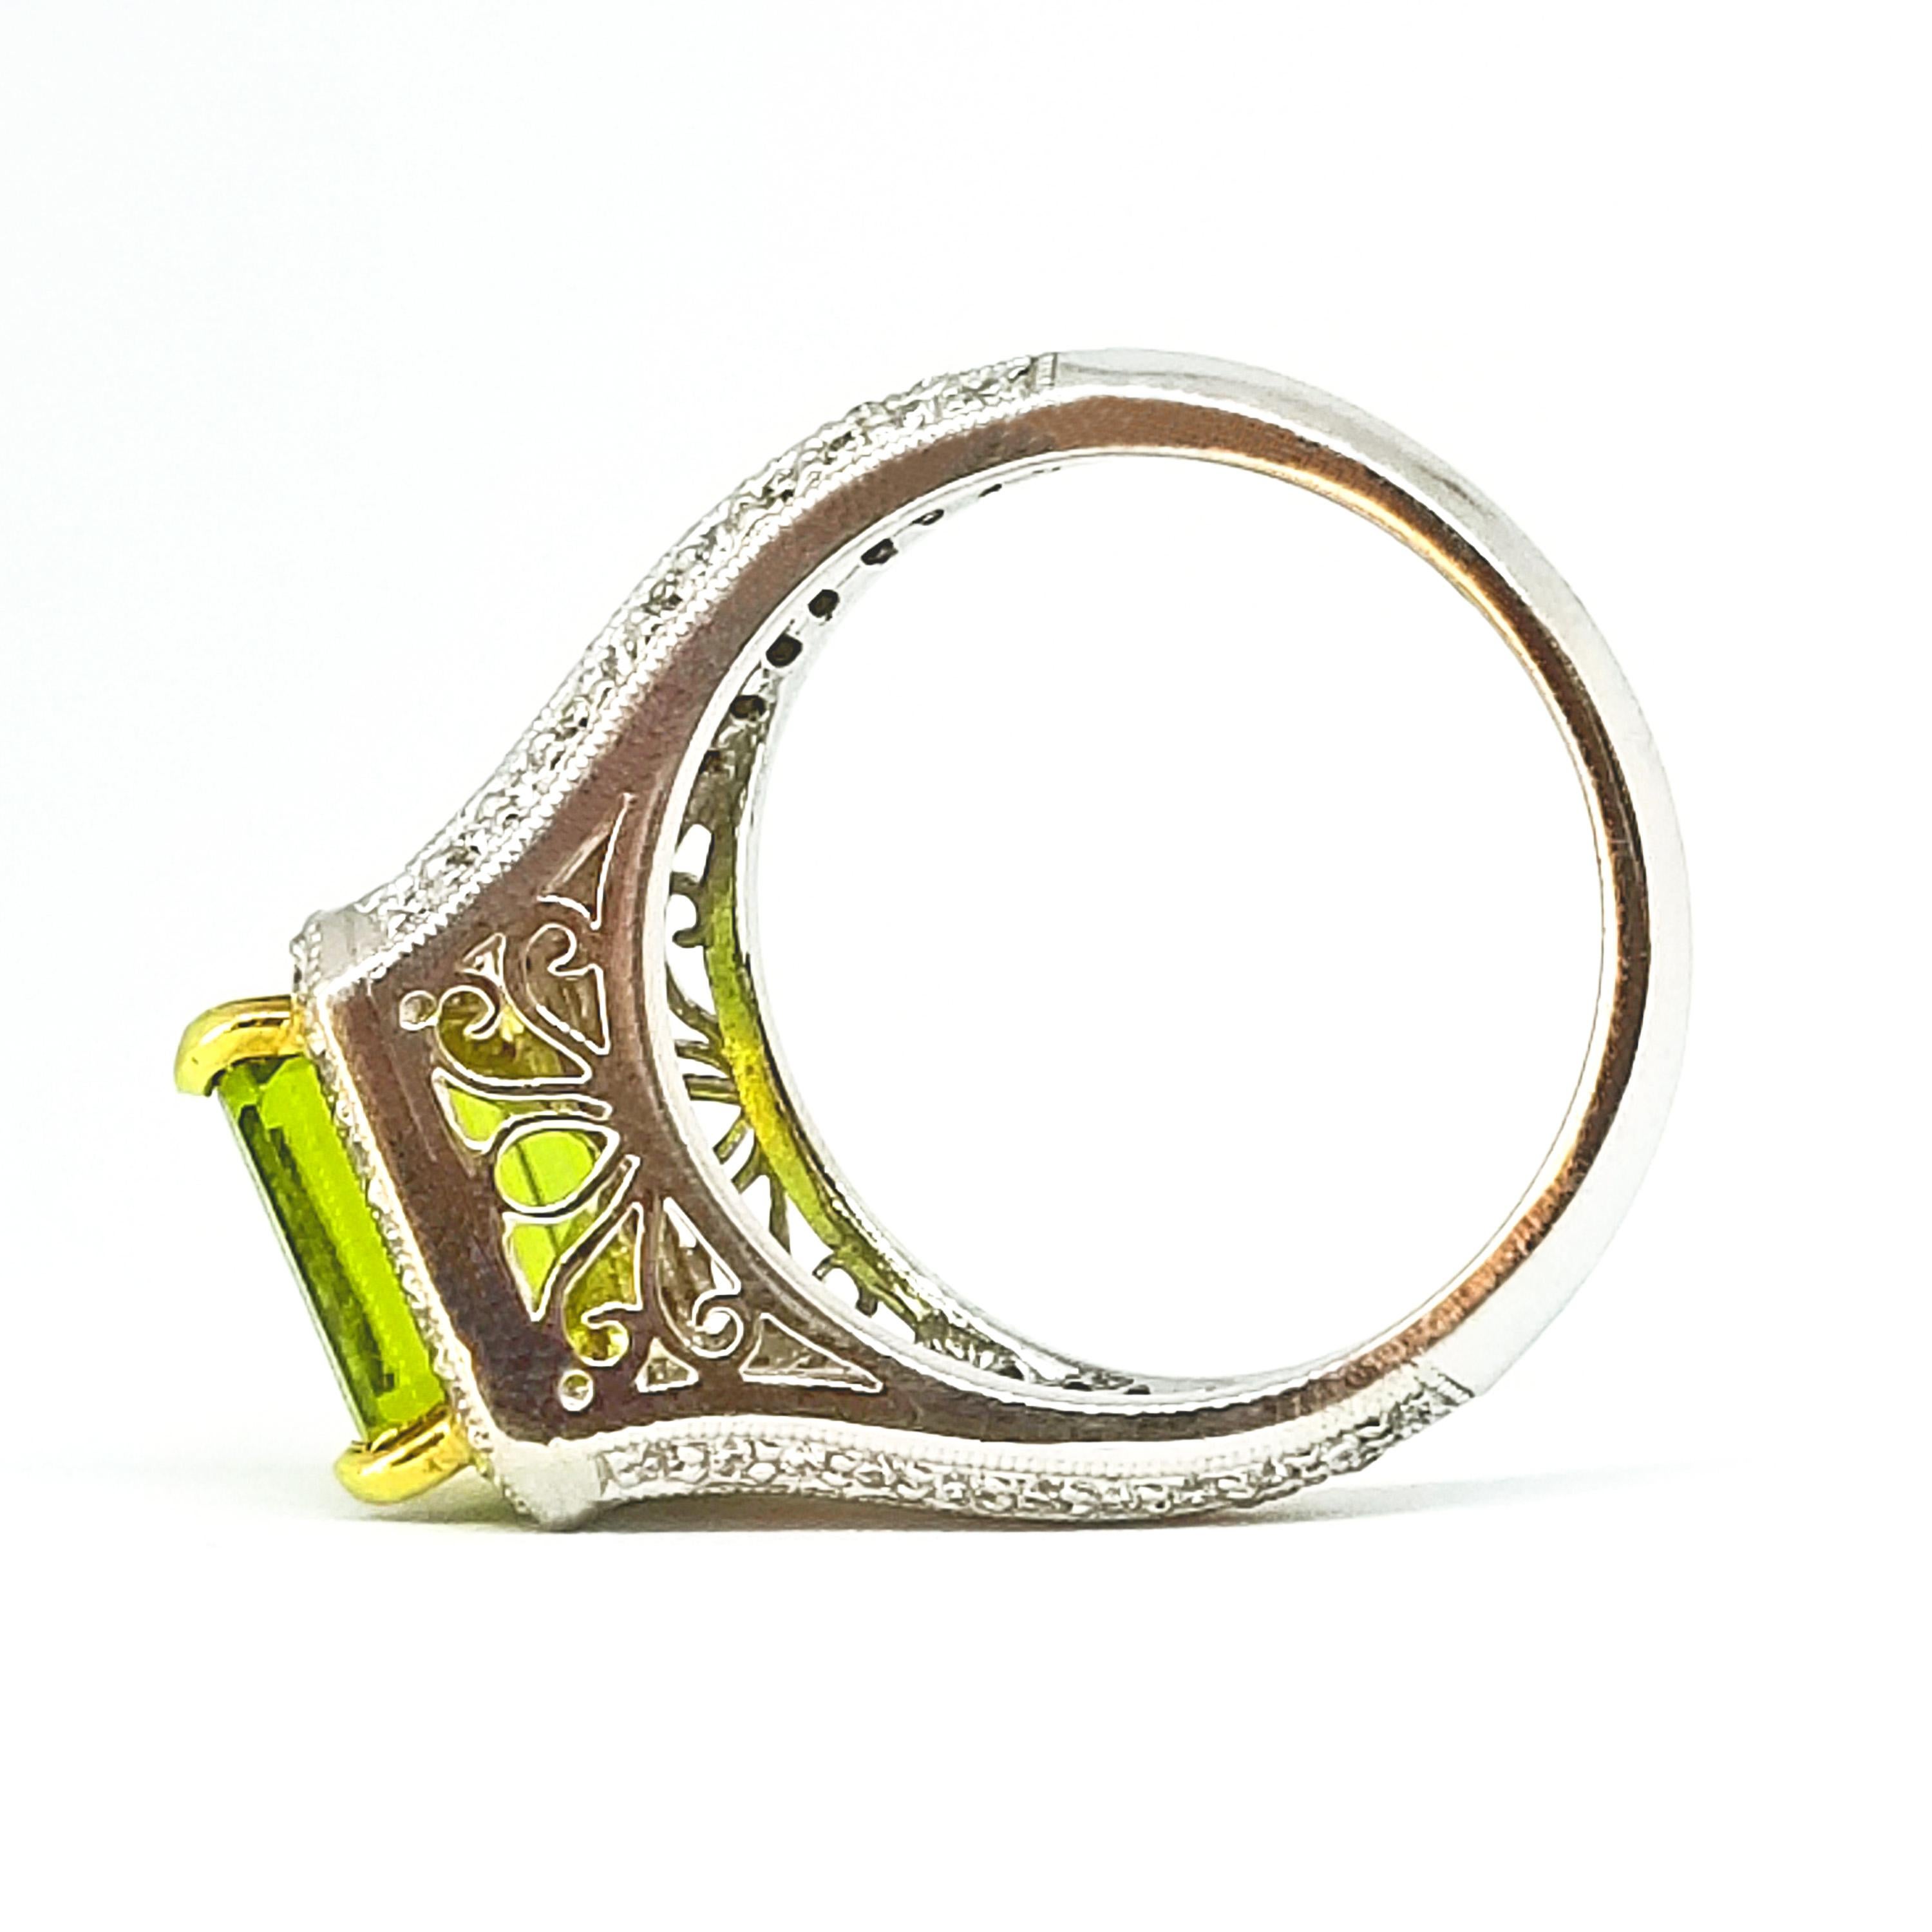 This Stately Cocktail Ring is set with a 3.55 Carat Square Step Cut Burmese Peridot. The Gem Quality stone is of Rich Green hue and is set in four heavy prongs above a Platinum square Halo of Round Brilliant Diamonds. Round Brilliant Diamonds